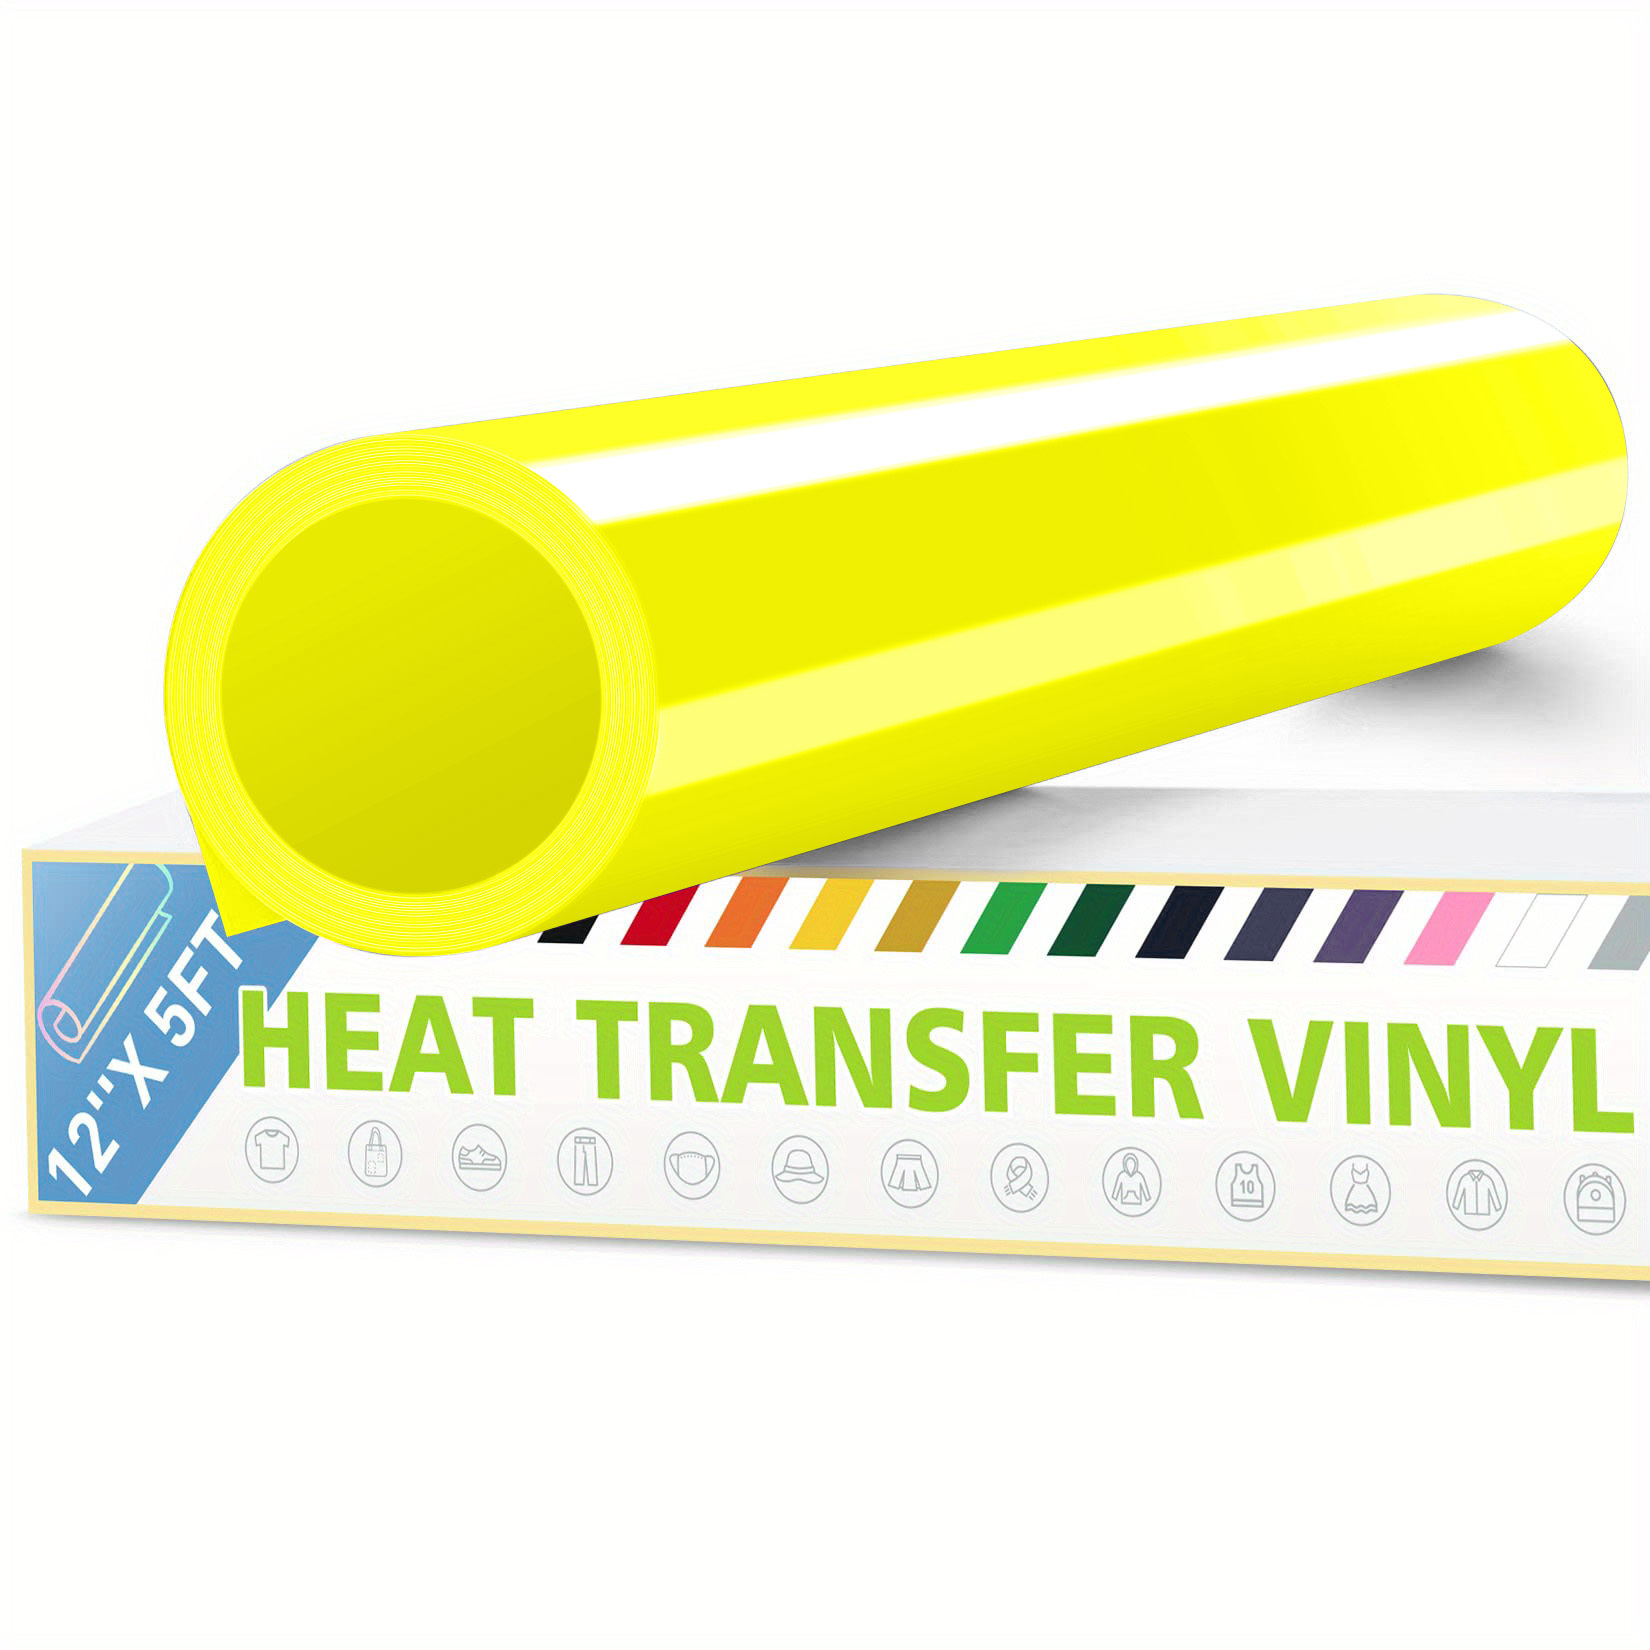 Yellow HTV Heat Transfer Vinyl 12 x 5FT Iron on Heat Press Yellow Vinyl  Roll for Cricut & Heat Press Machine,Perfect for T Shirts & Other Fabric  DIY(Yellow) 